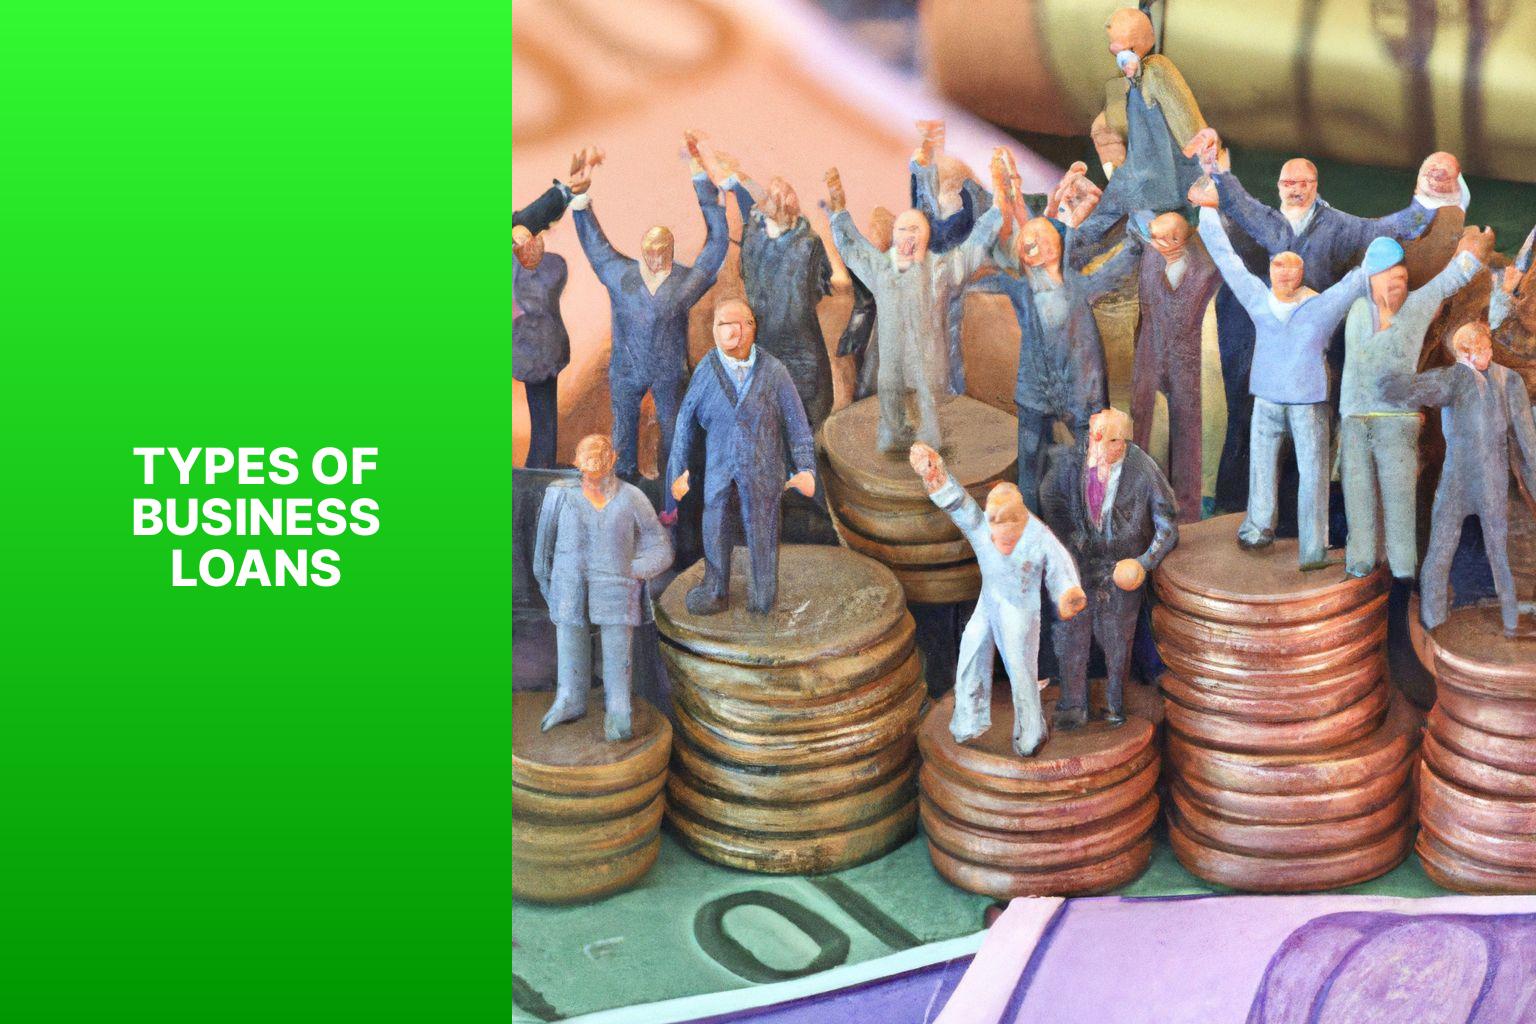 Types of Business Loans - Beyond Money: Understanding the Purpose of a Business Loan 